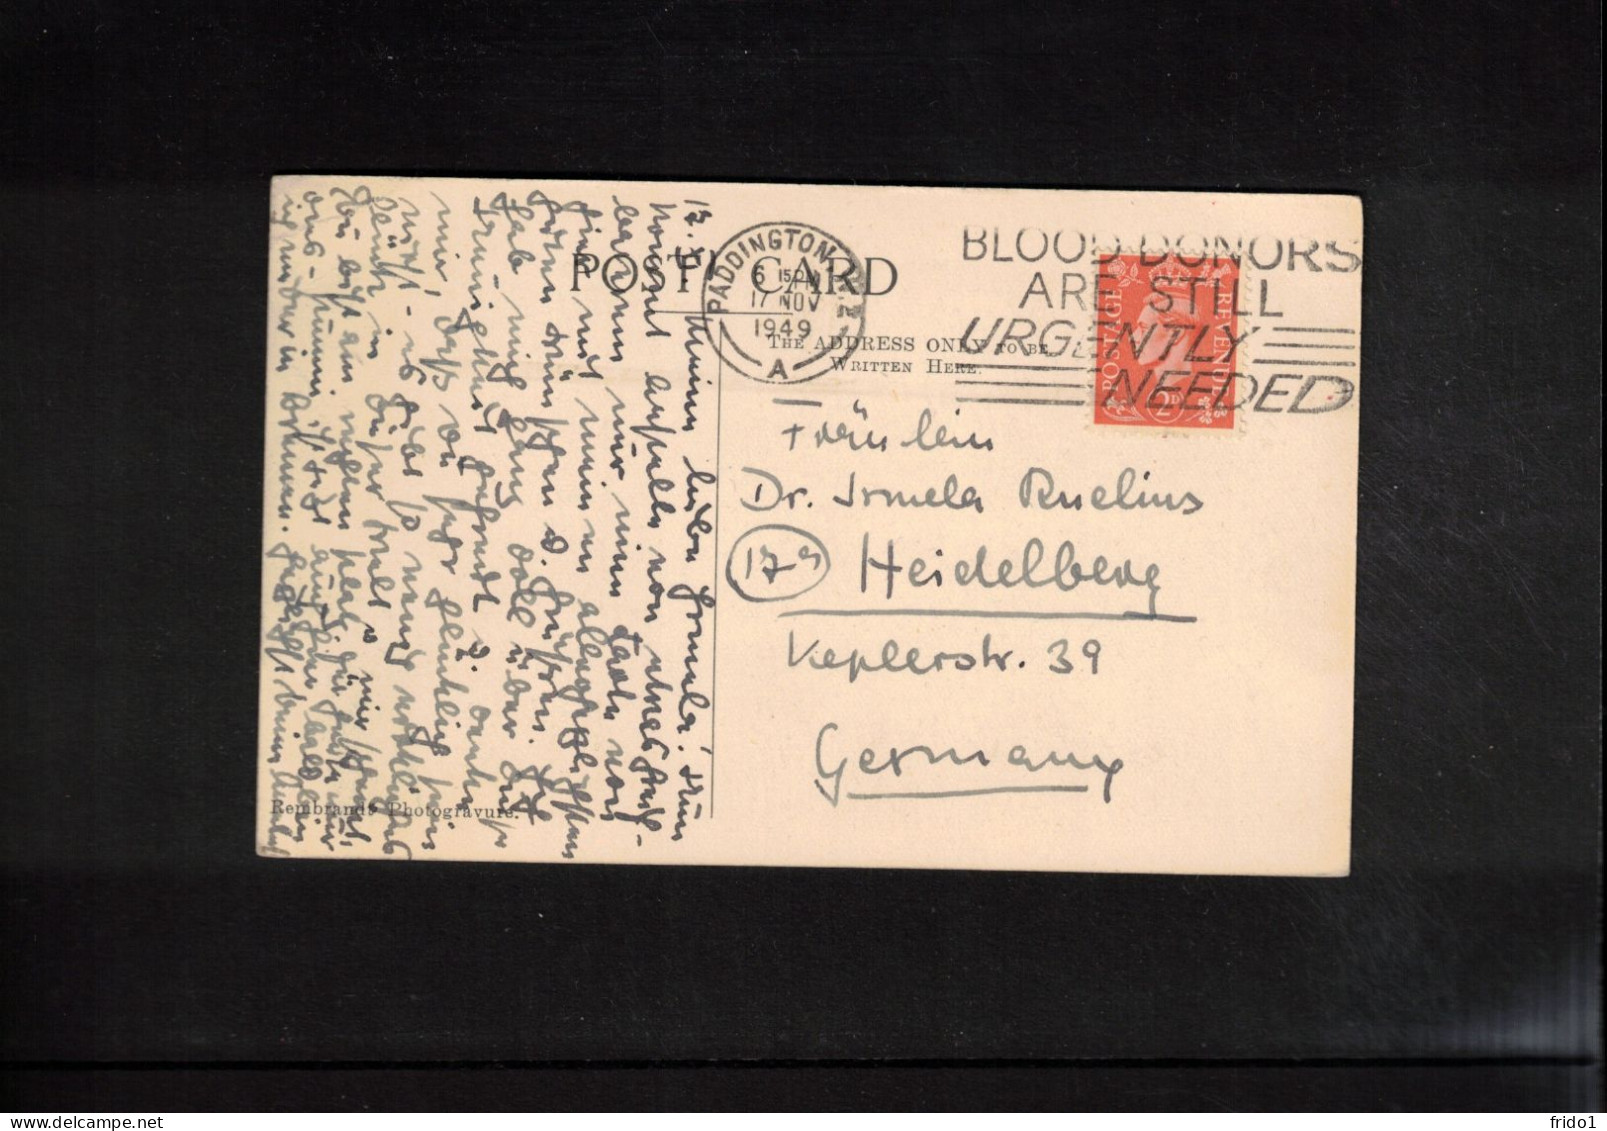 Great Britain 1949 Health  Interesting Postmark BLOOD DONORS ARE STILL URGENTLY NEEDED - First Aid